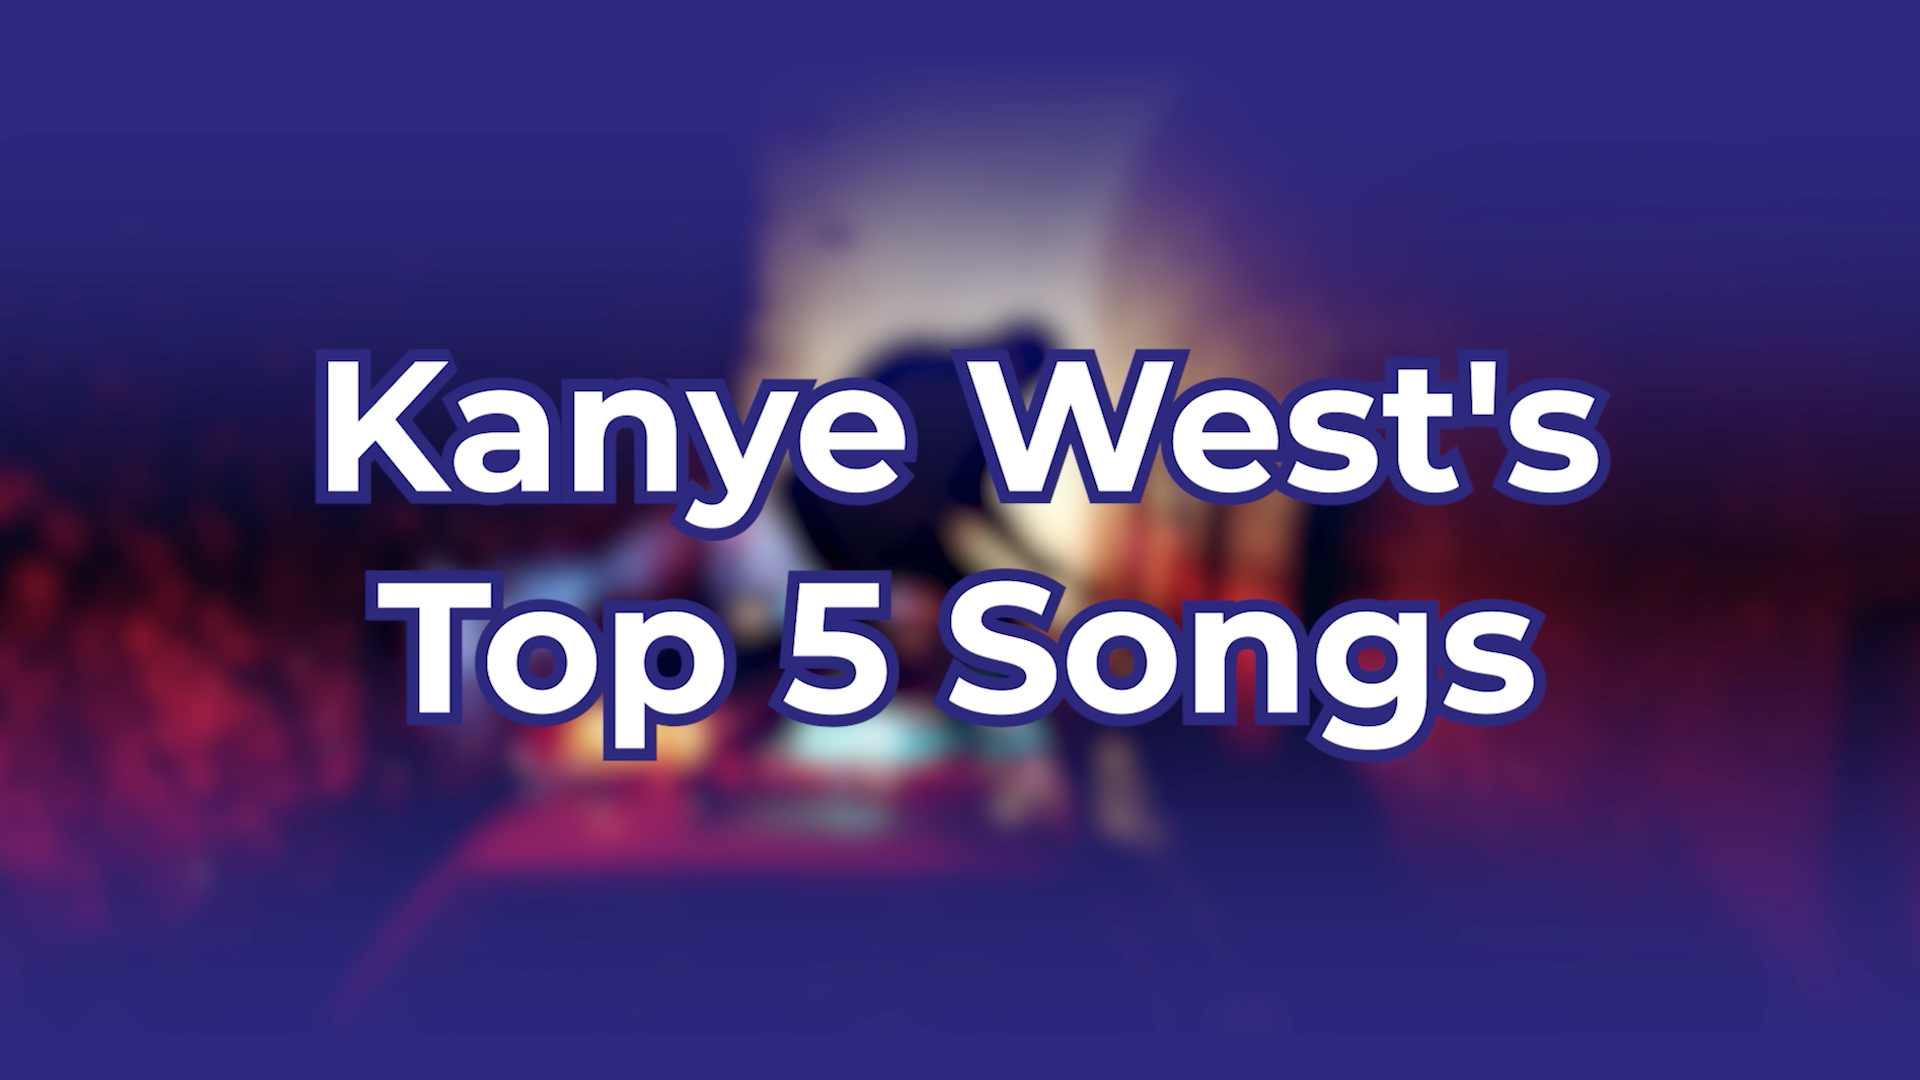 Kanye West's Top 5 Songs